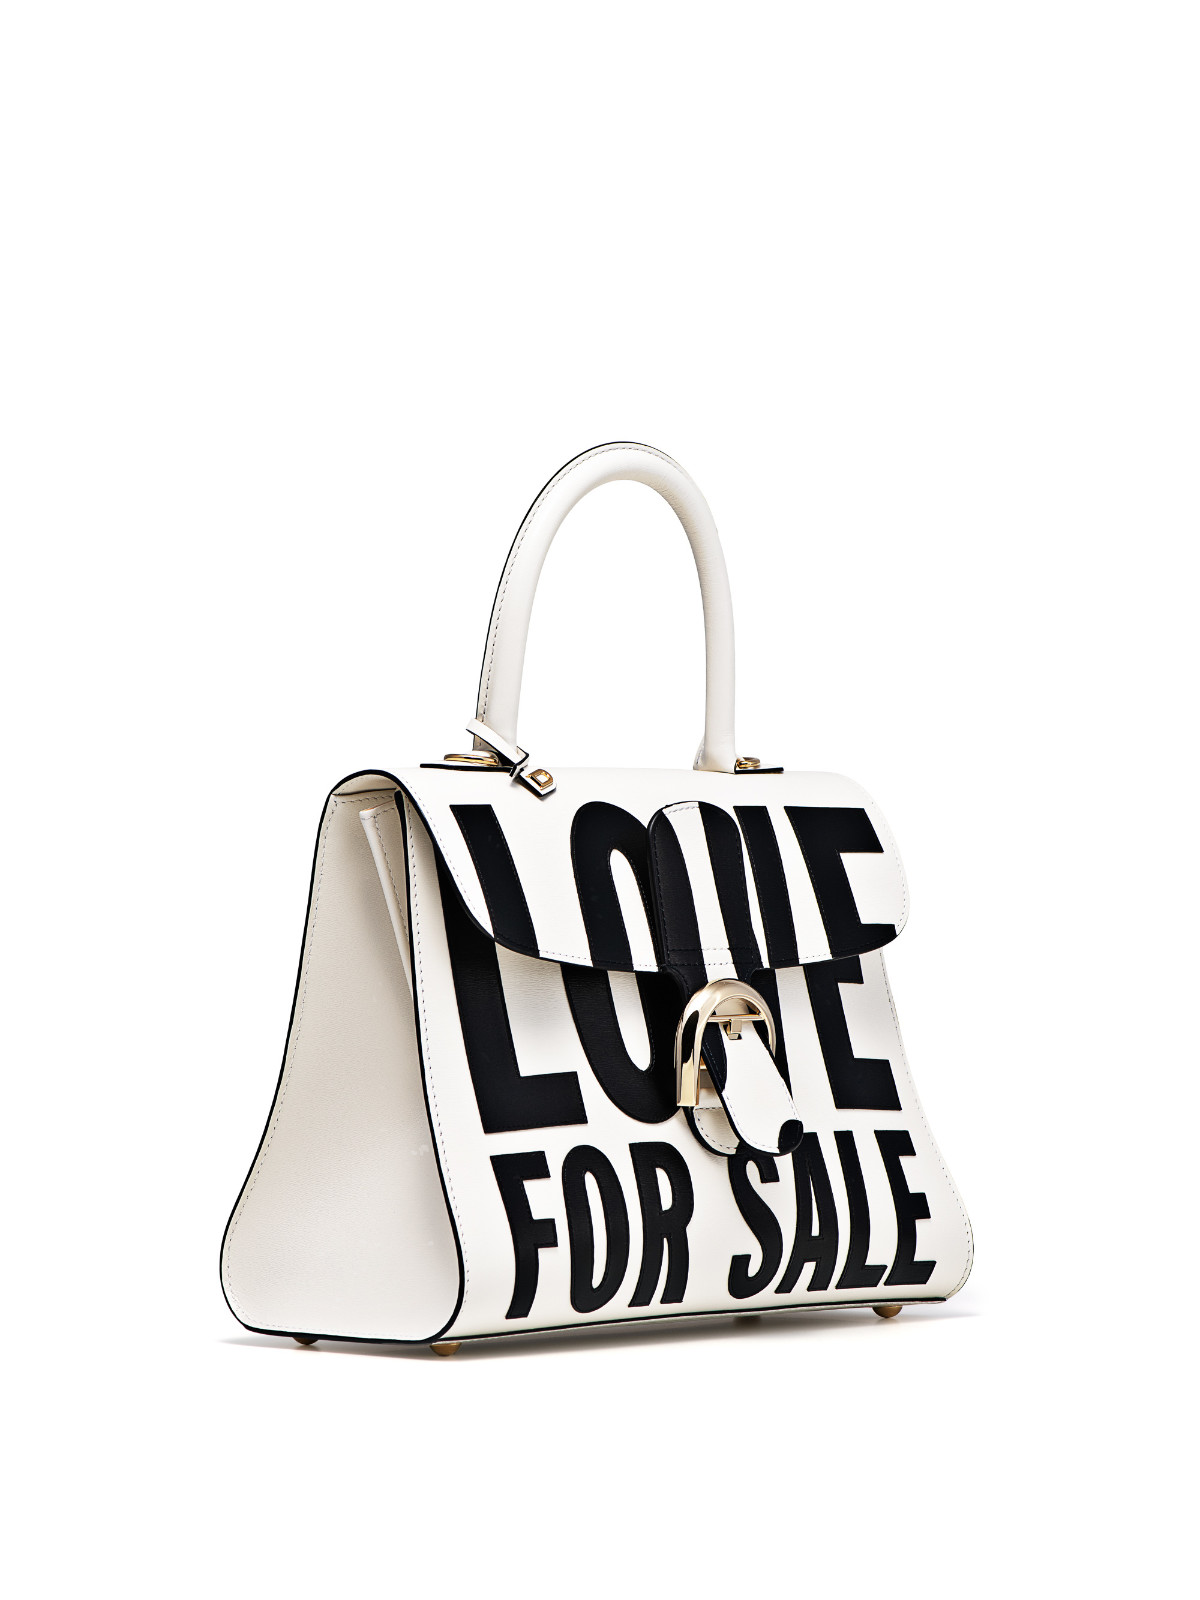 Music Artist And Actress Lady Gaga Was Spotted In New York Carrying Her Brillant ‘Love For Sale’ Bag